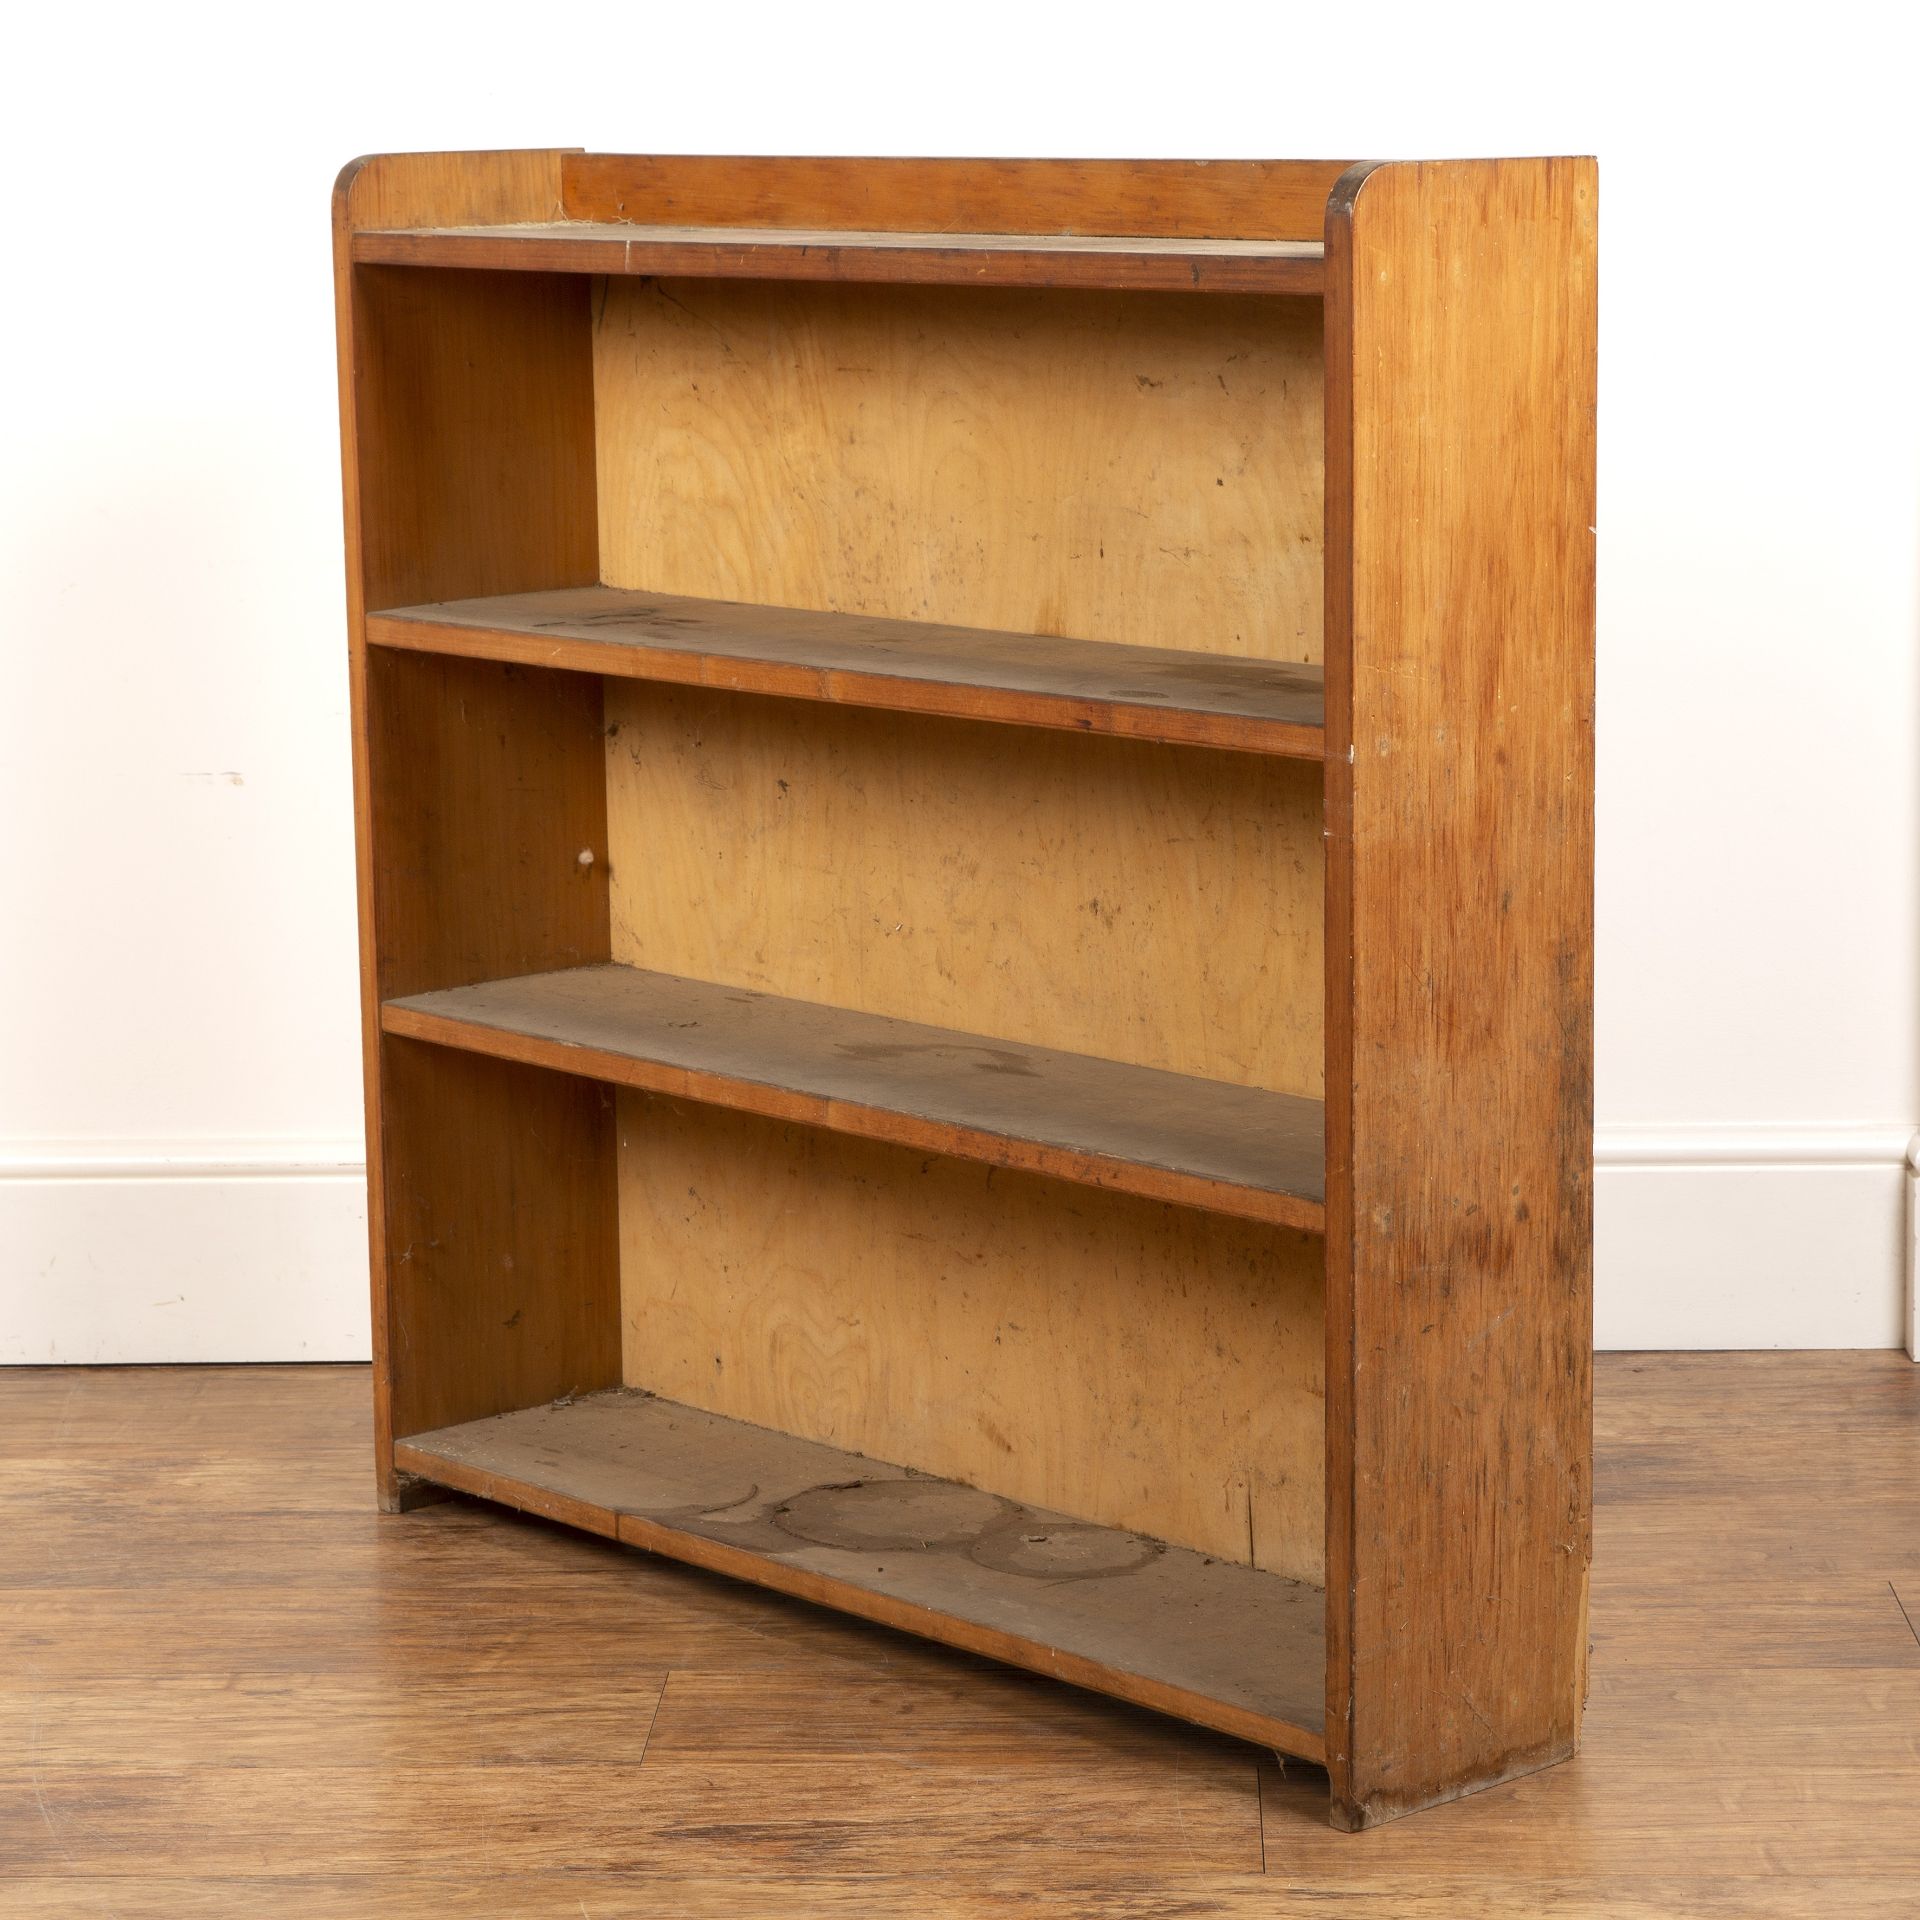 Cotswold School pine open bookcase, with fitted shelves, unmarked, 92cm wide x 91cm high x 20cm deep - Image 3 of 4